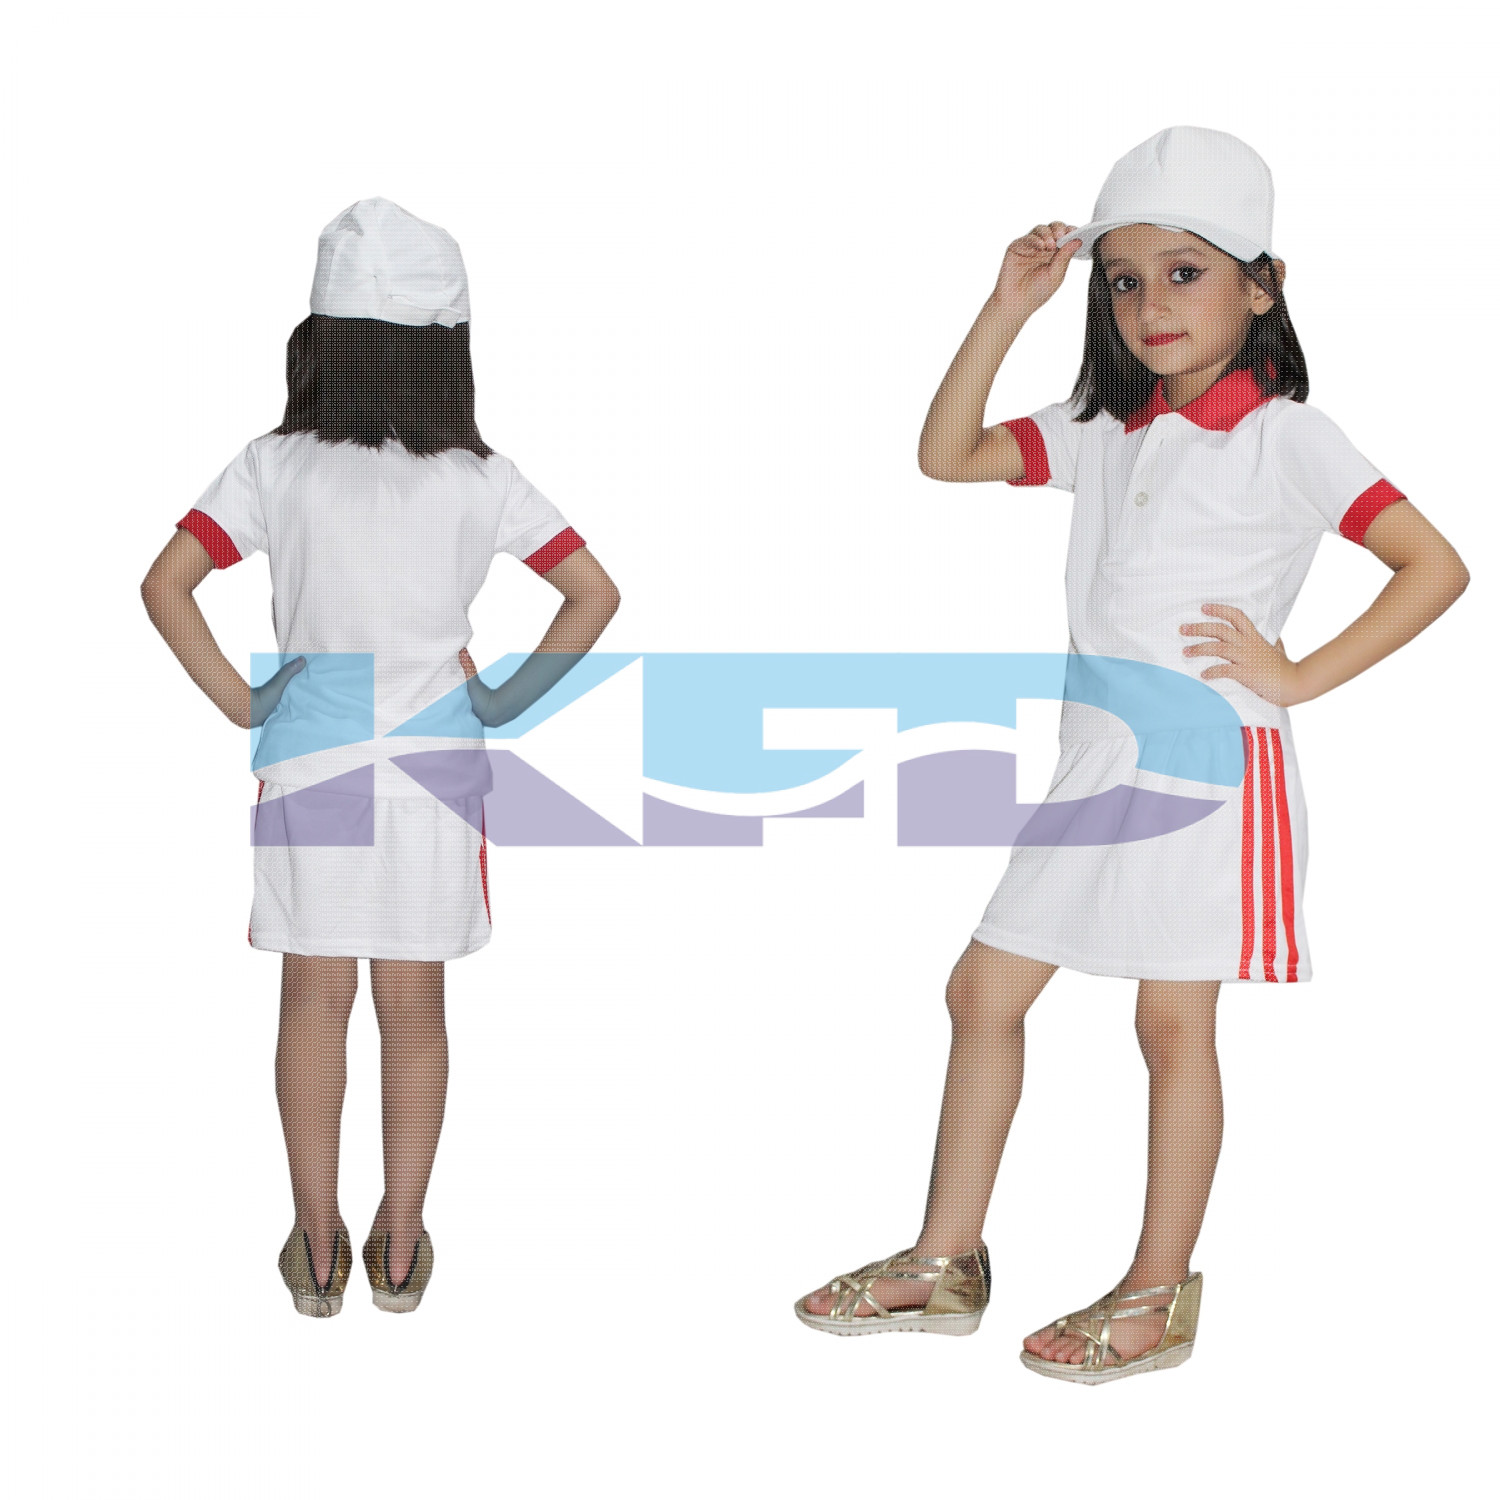 Sania Mirza fancy dress for kids,National Hero Costume For School Annual function/Theme Party/Competition/Stage Shows Dress